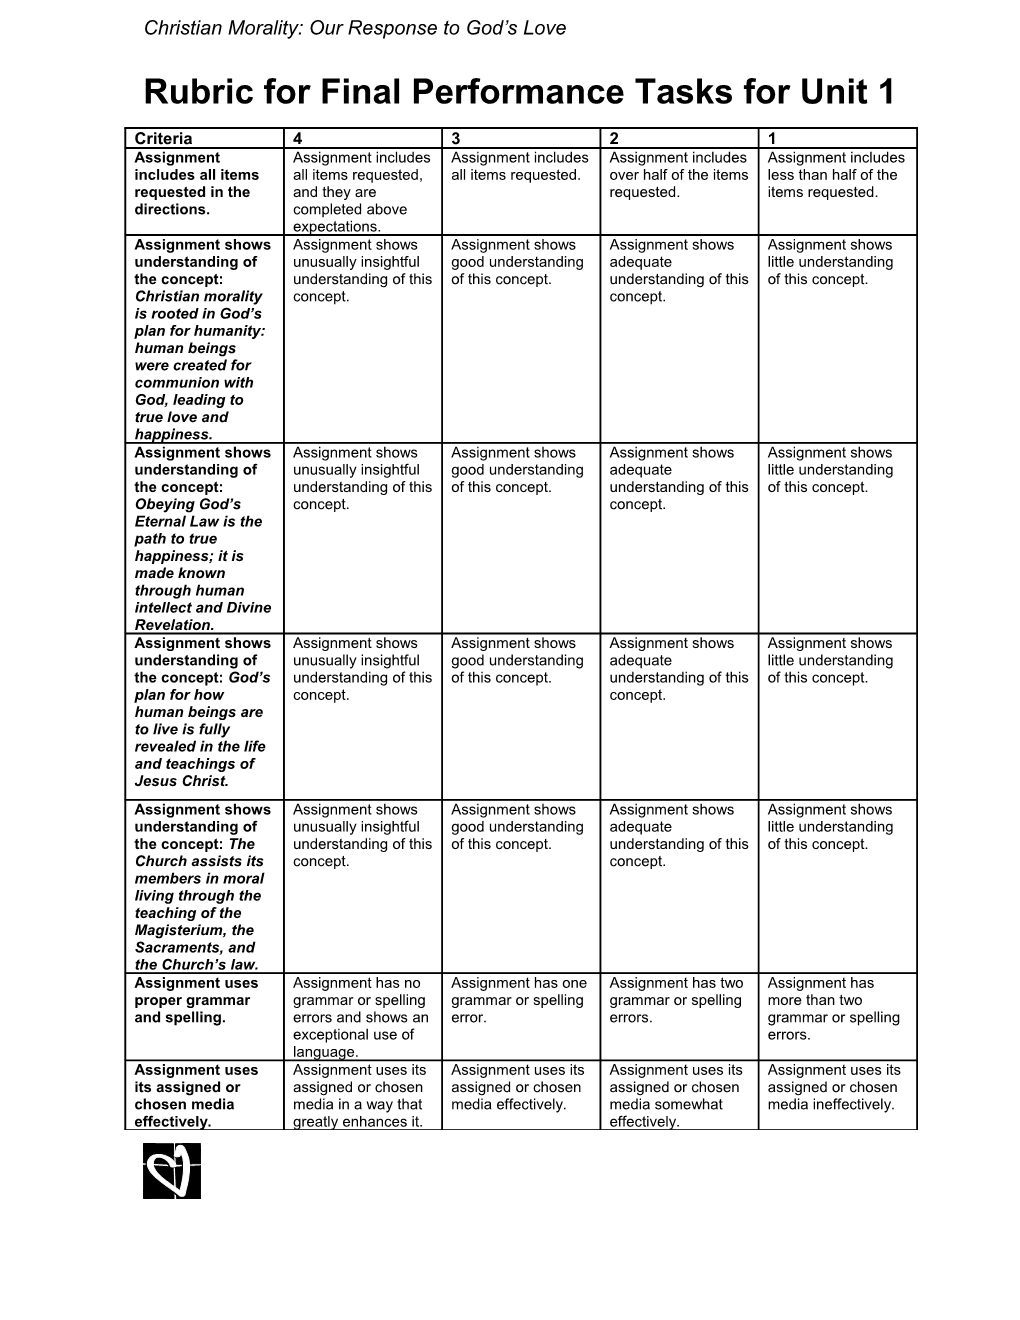 Rubric for Final Performance Tasks for Unit 1